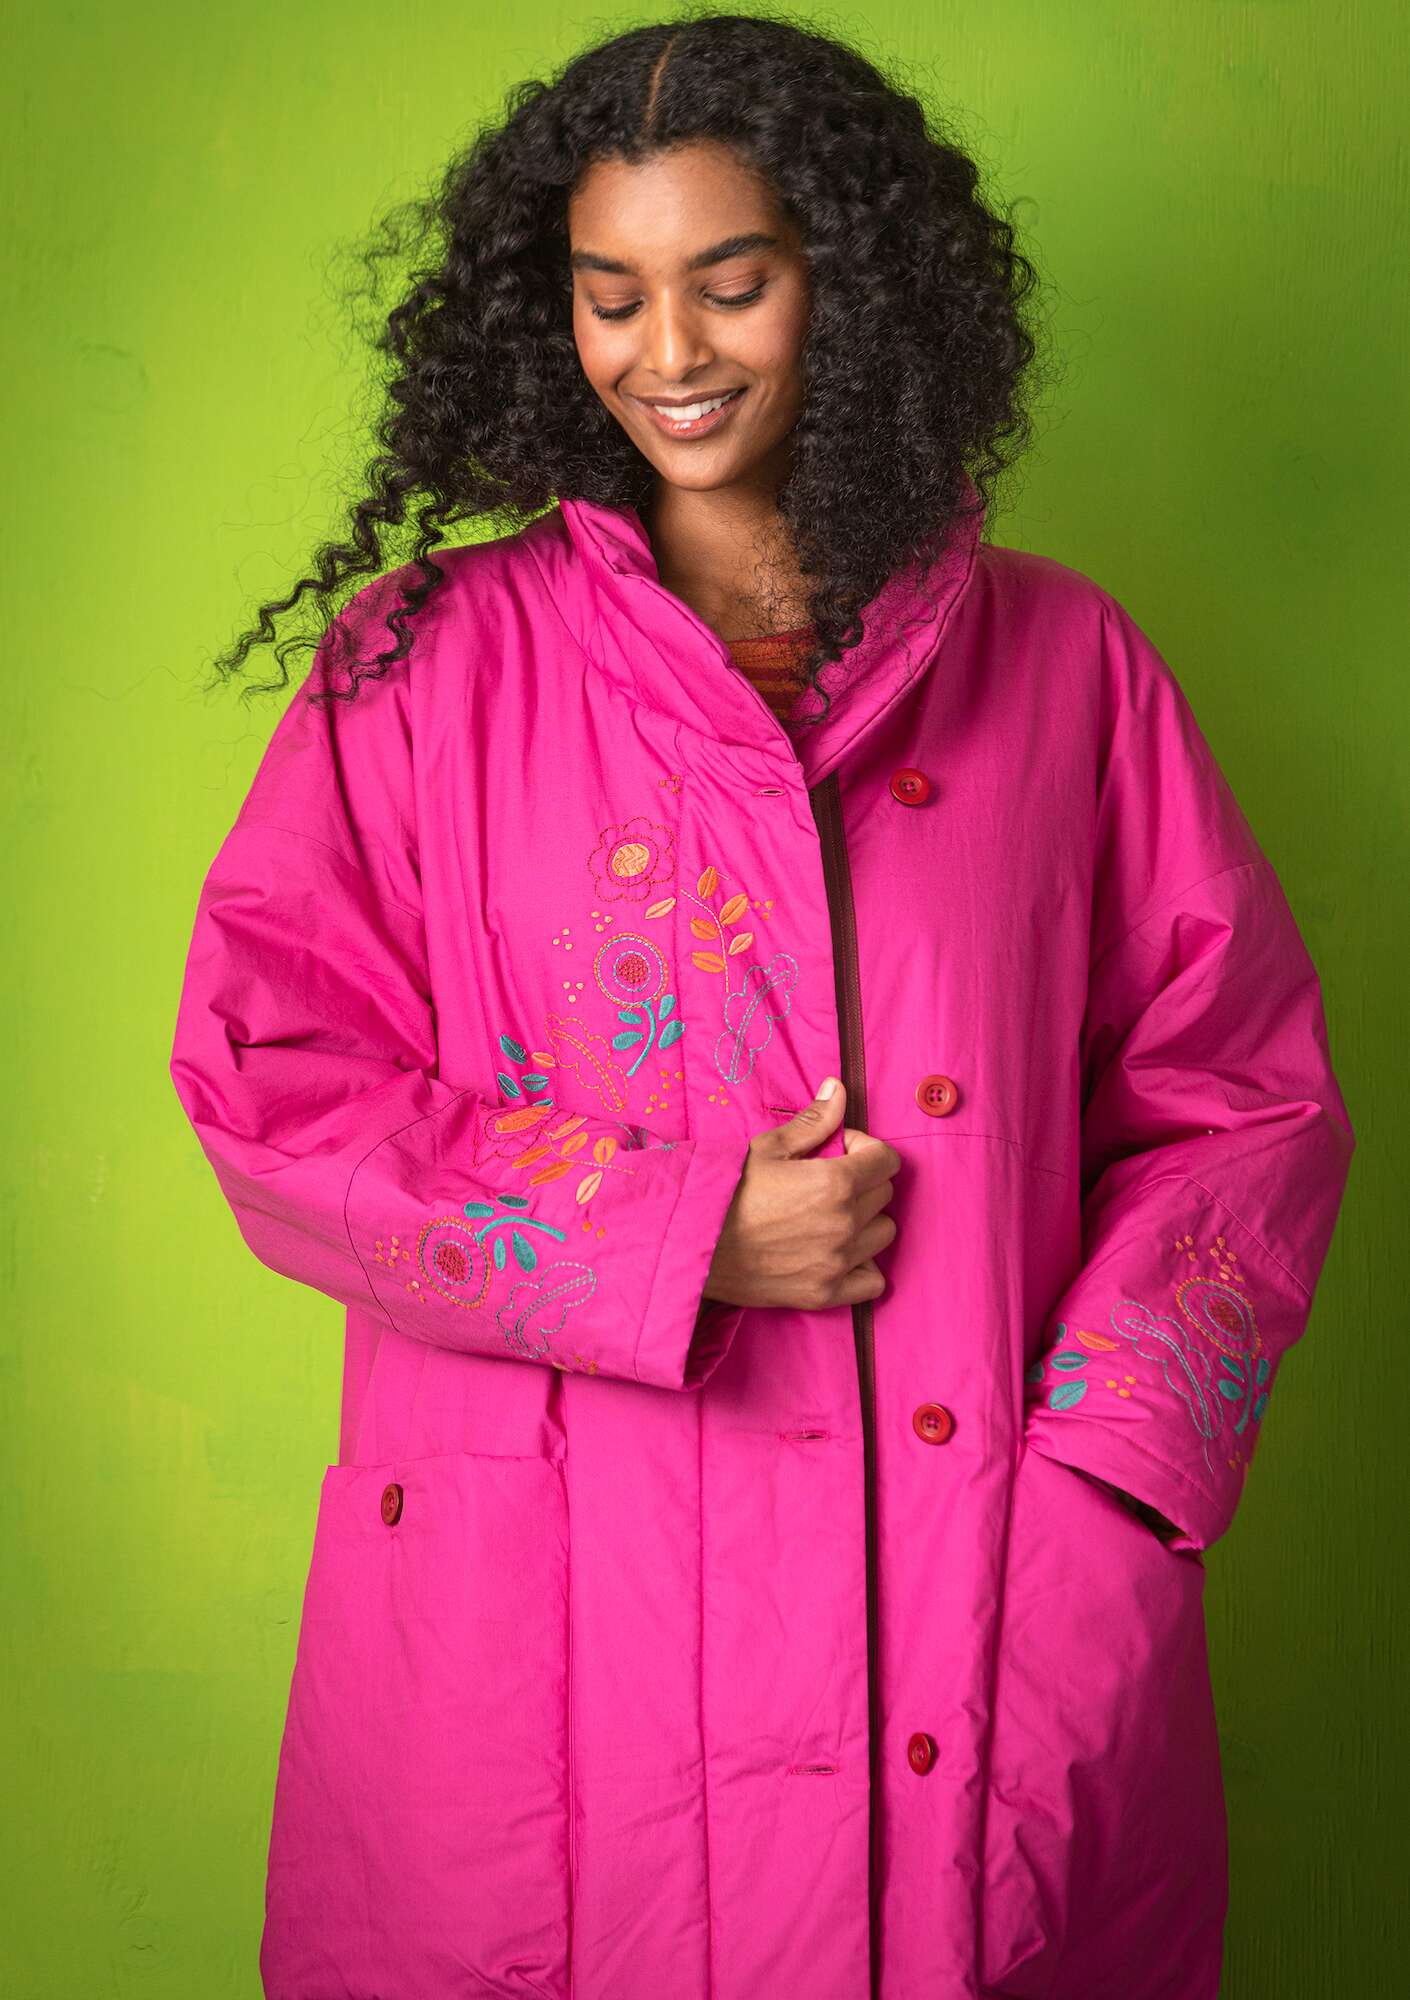 “Rimfrost” coat in organic/recycled cotton cerise